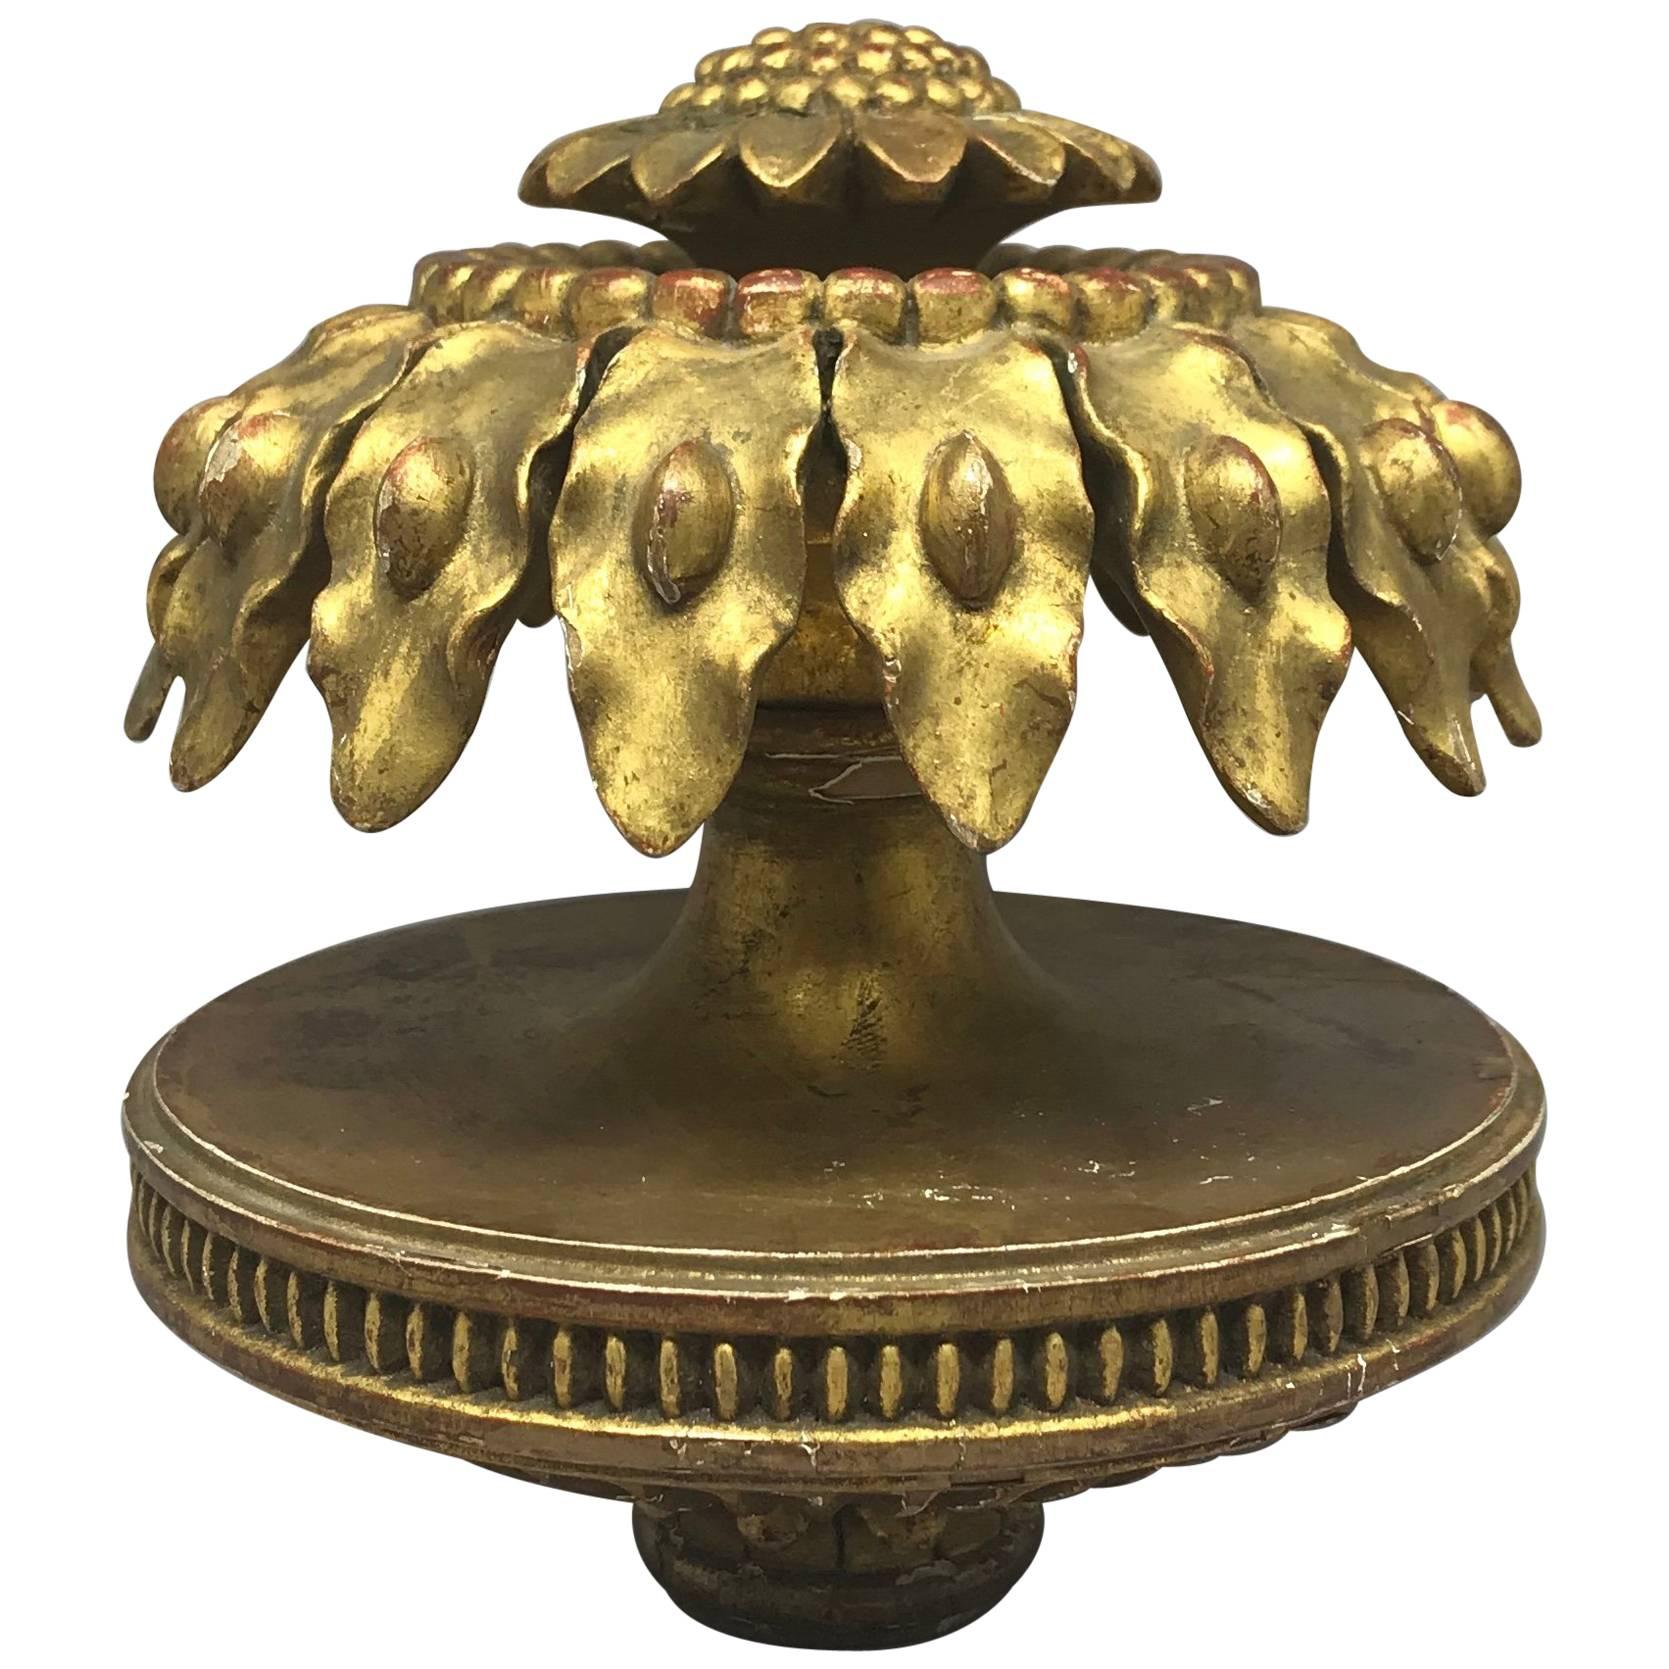 Carved Gilt-Wood Sunflower Finial Ornament